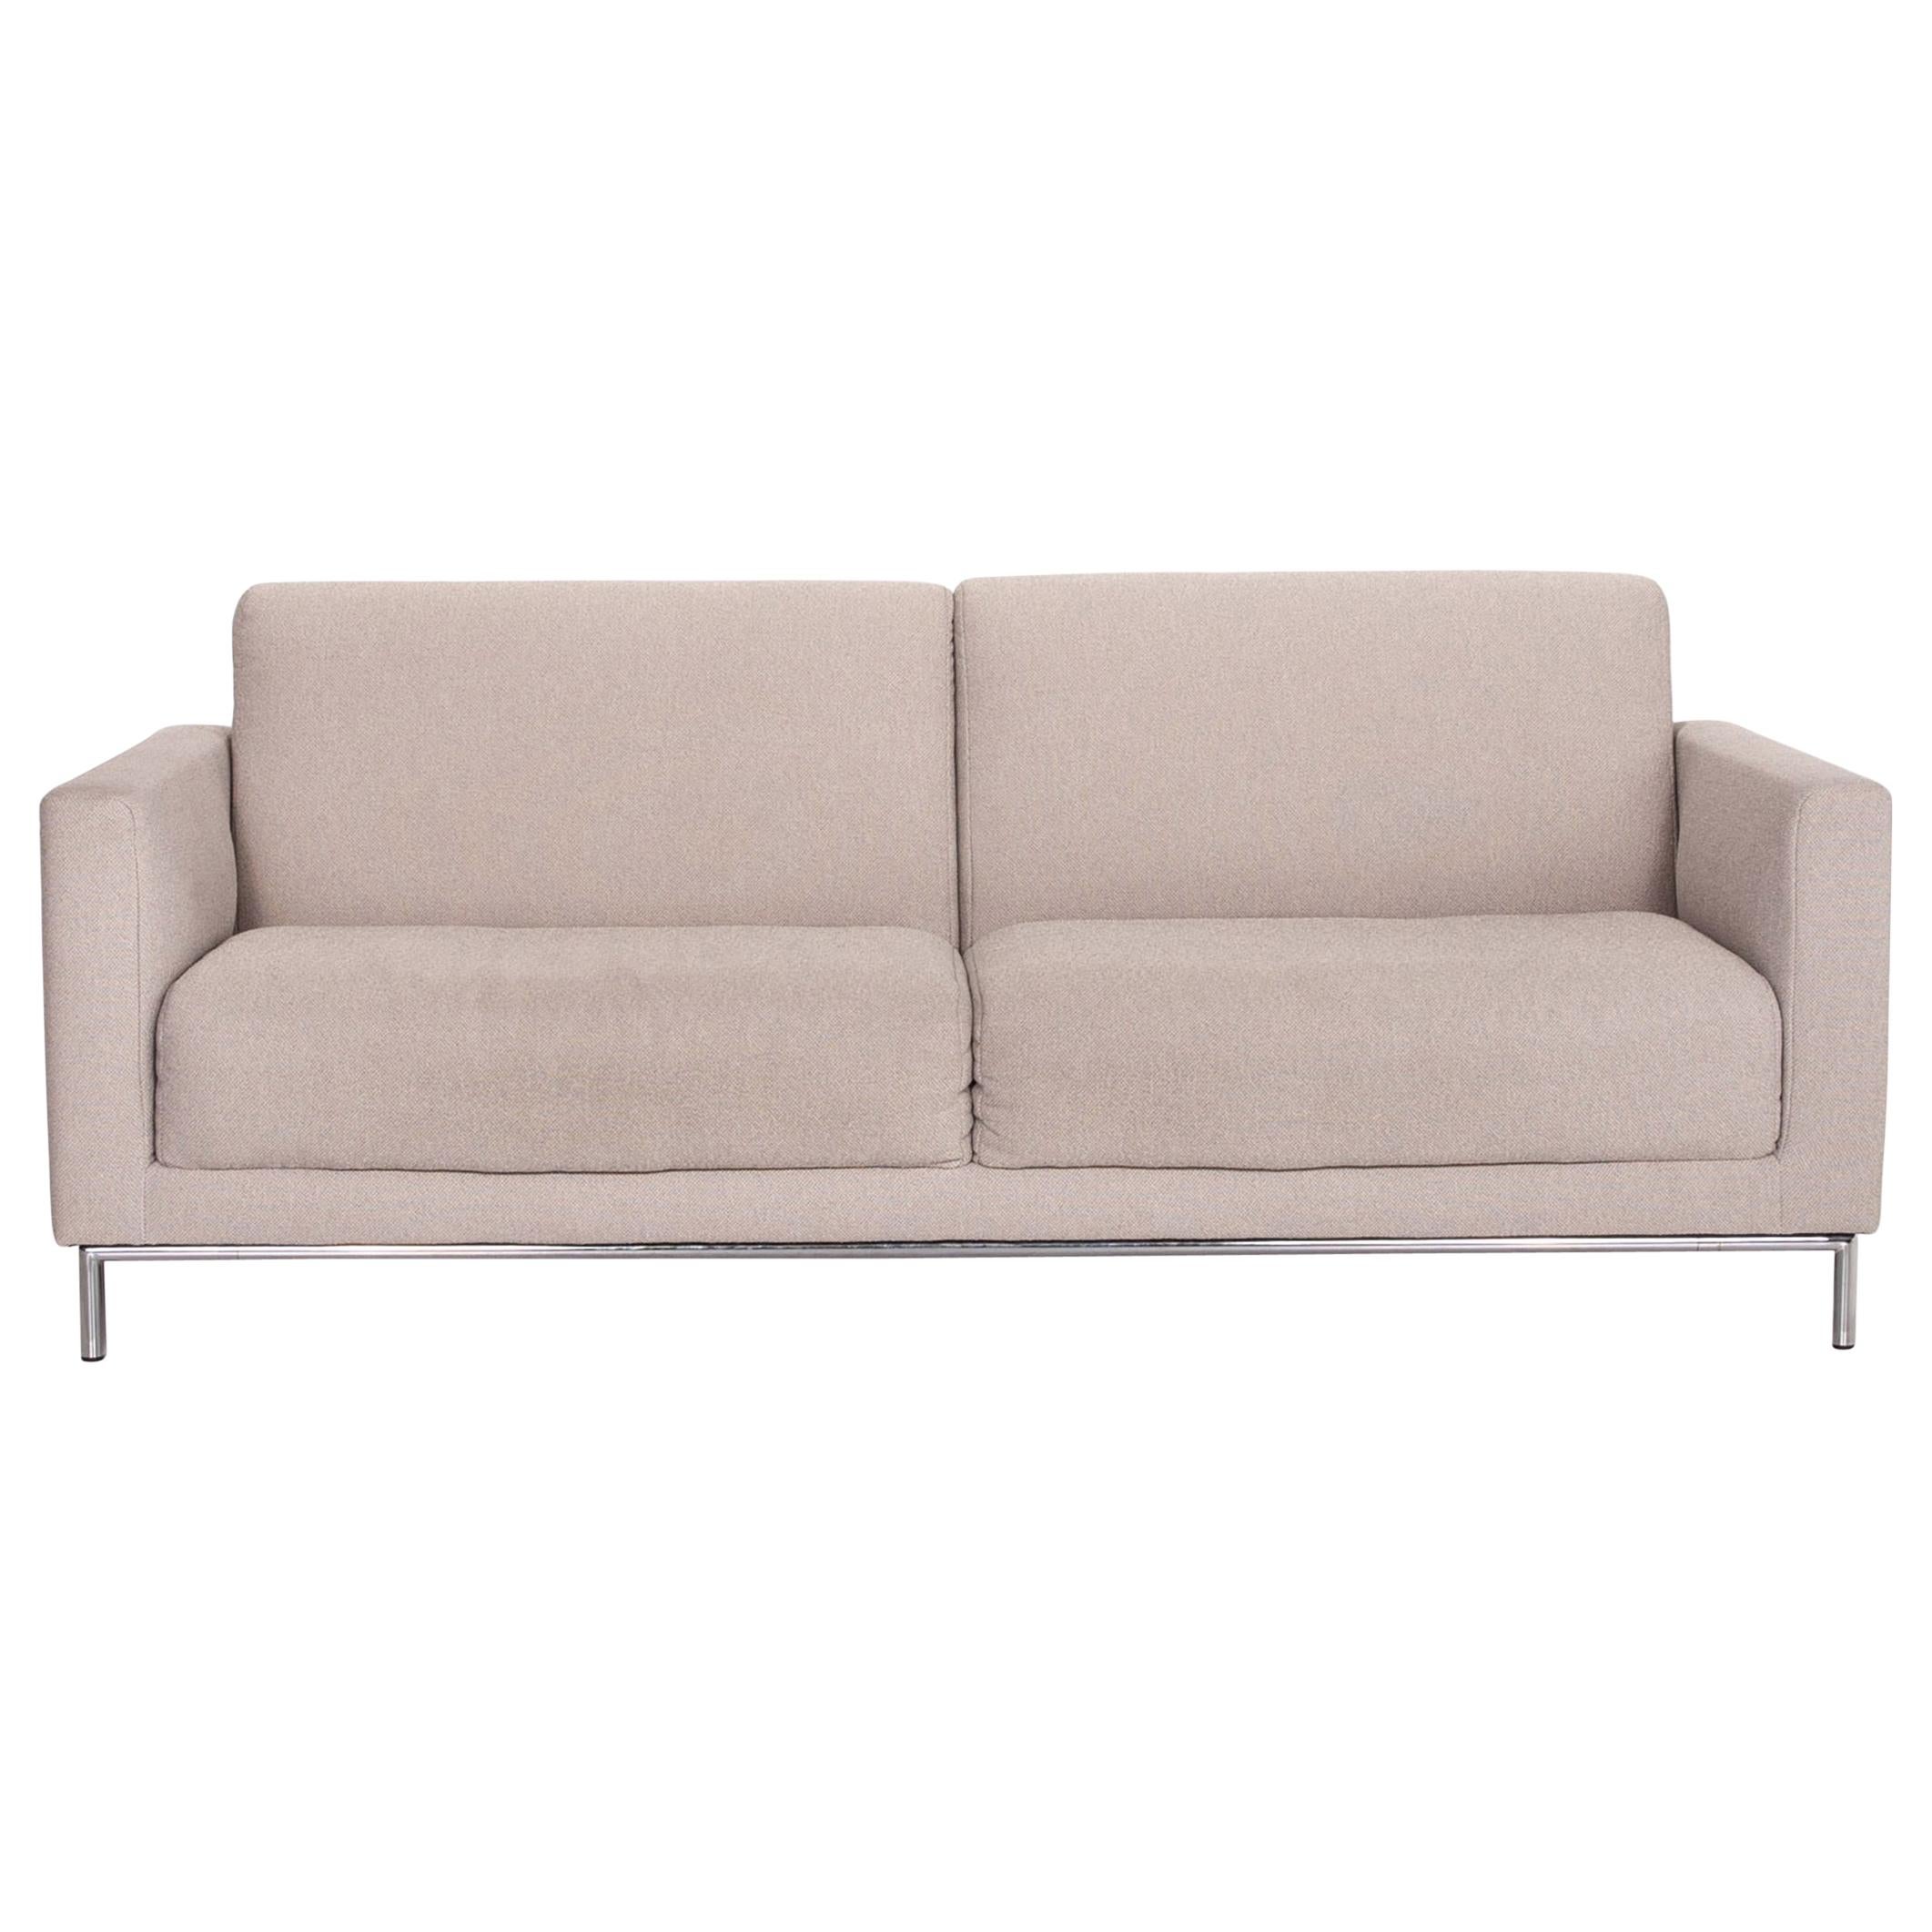 Rolf Benz Freistil 141 Fabric Sofa Gray Two-Seat Couch For Sale